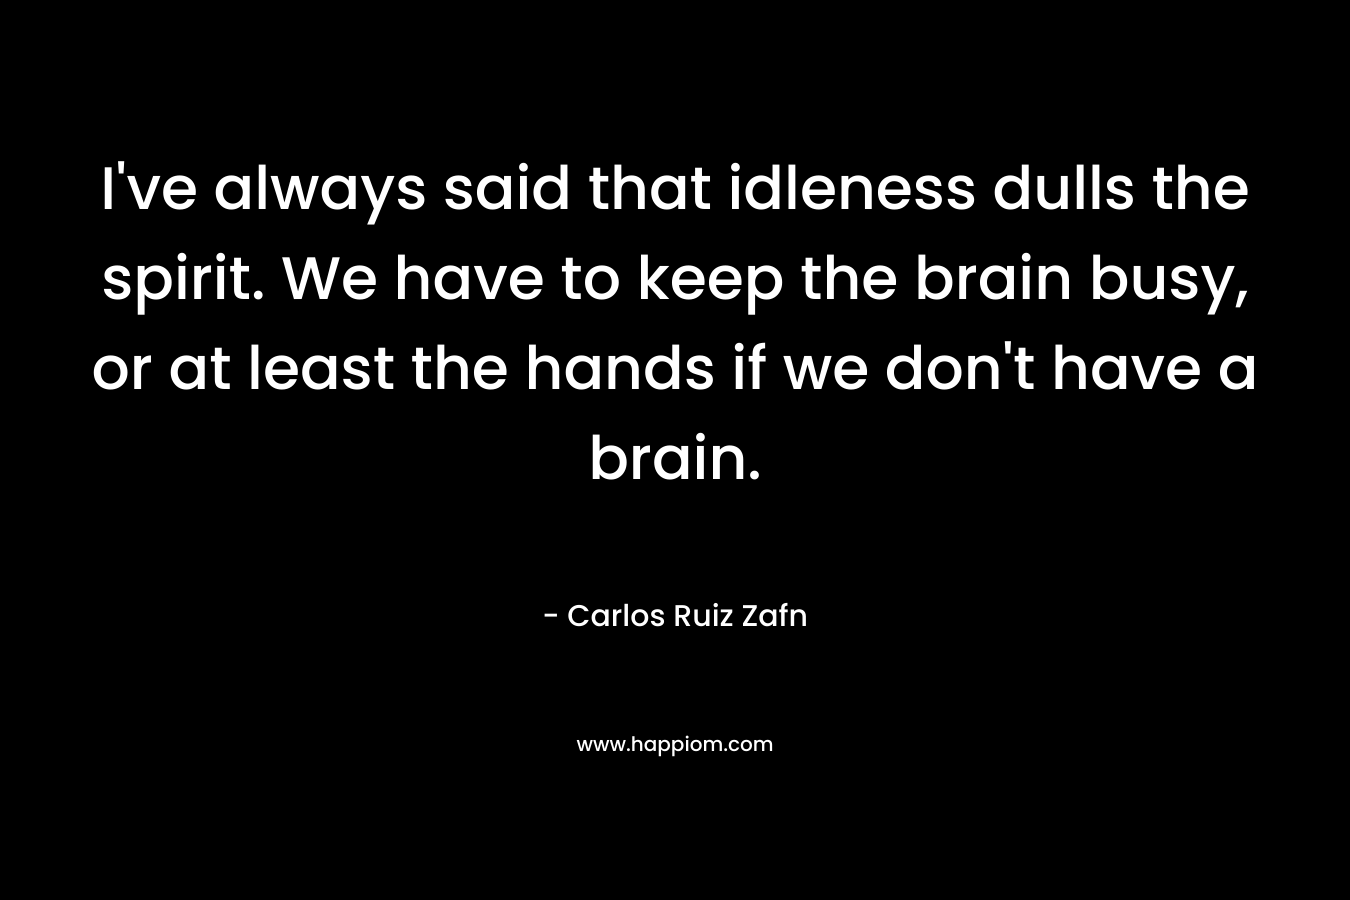 I've always said that idleness dulls the spirit. We have to keep the brain busy, or at least the hands if we don't have a brain.